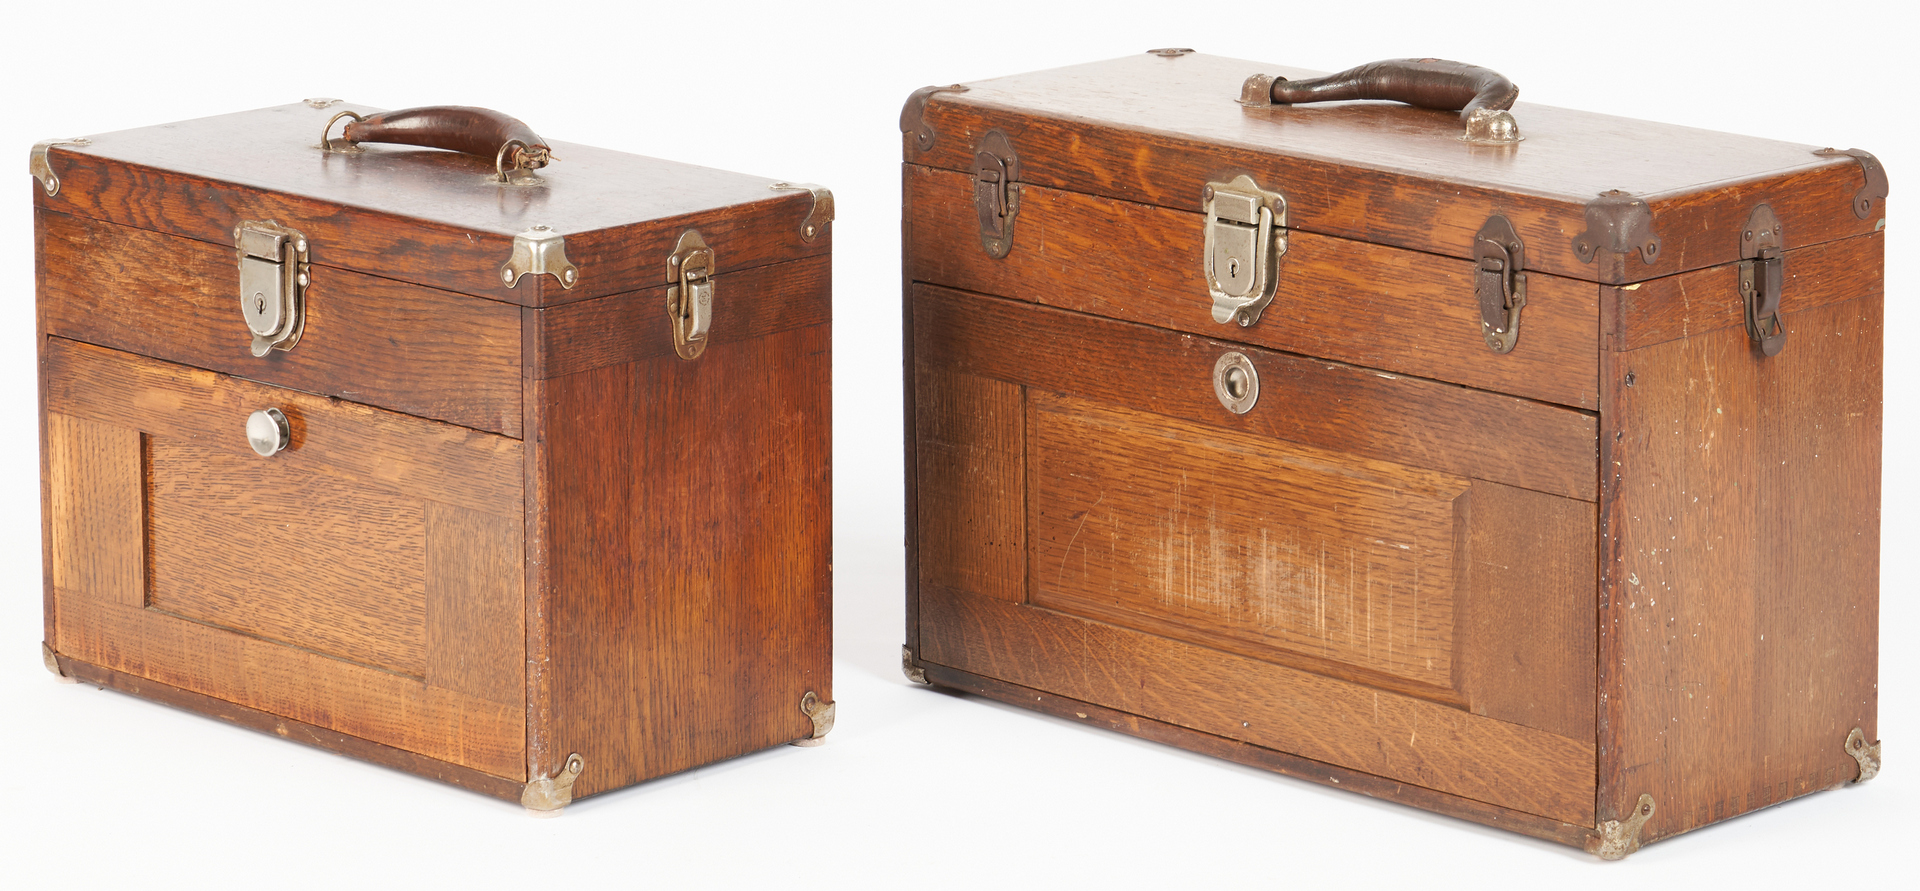 Lot 970: 2 Small Wooden Machinists' Chests